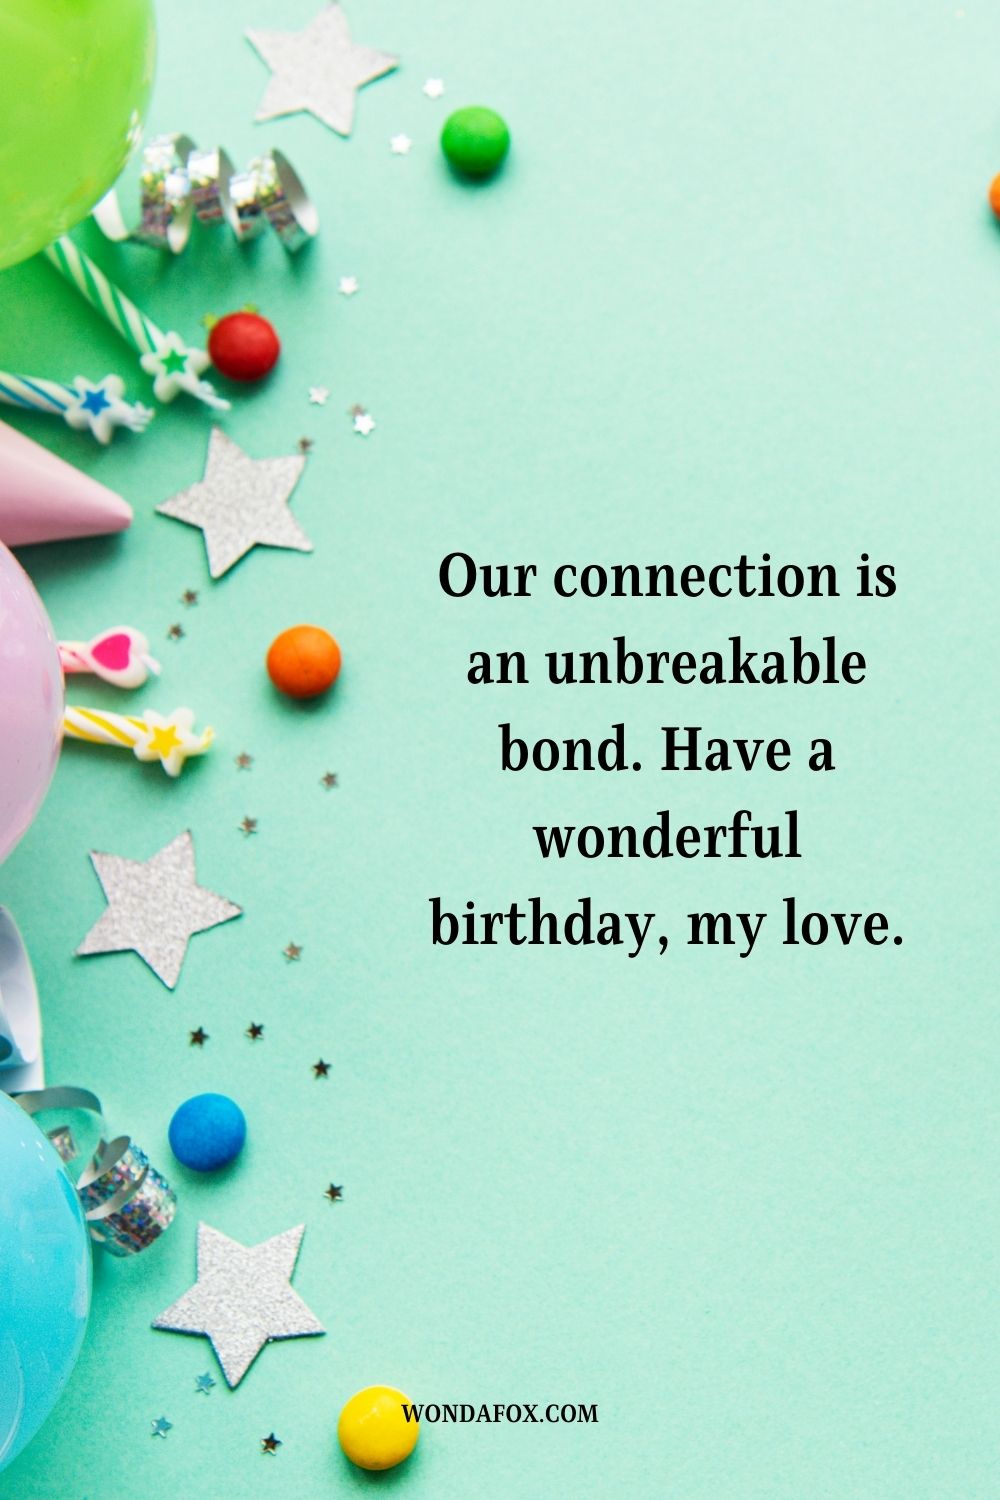 Our connection is an unbreakable bond. Have a wonderful birthday, my love.